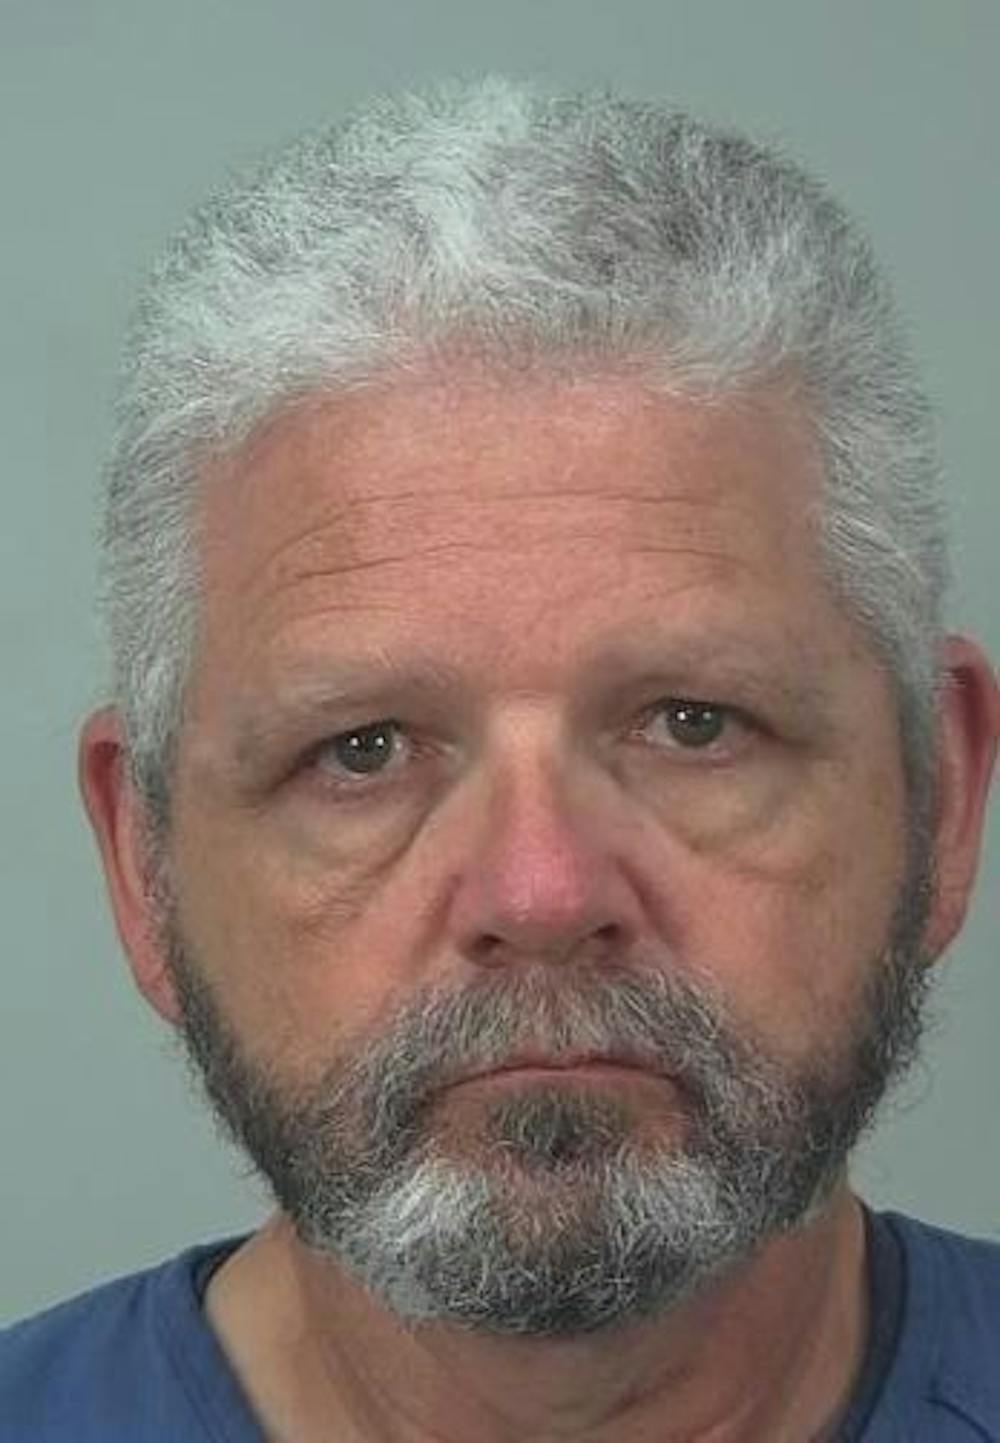 A judge set a $1 million price tag on bail for 59-year-old Steven Pirus, who told police he intentionally caused his Madison home to explode after shooting his wife in the head.